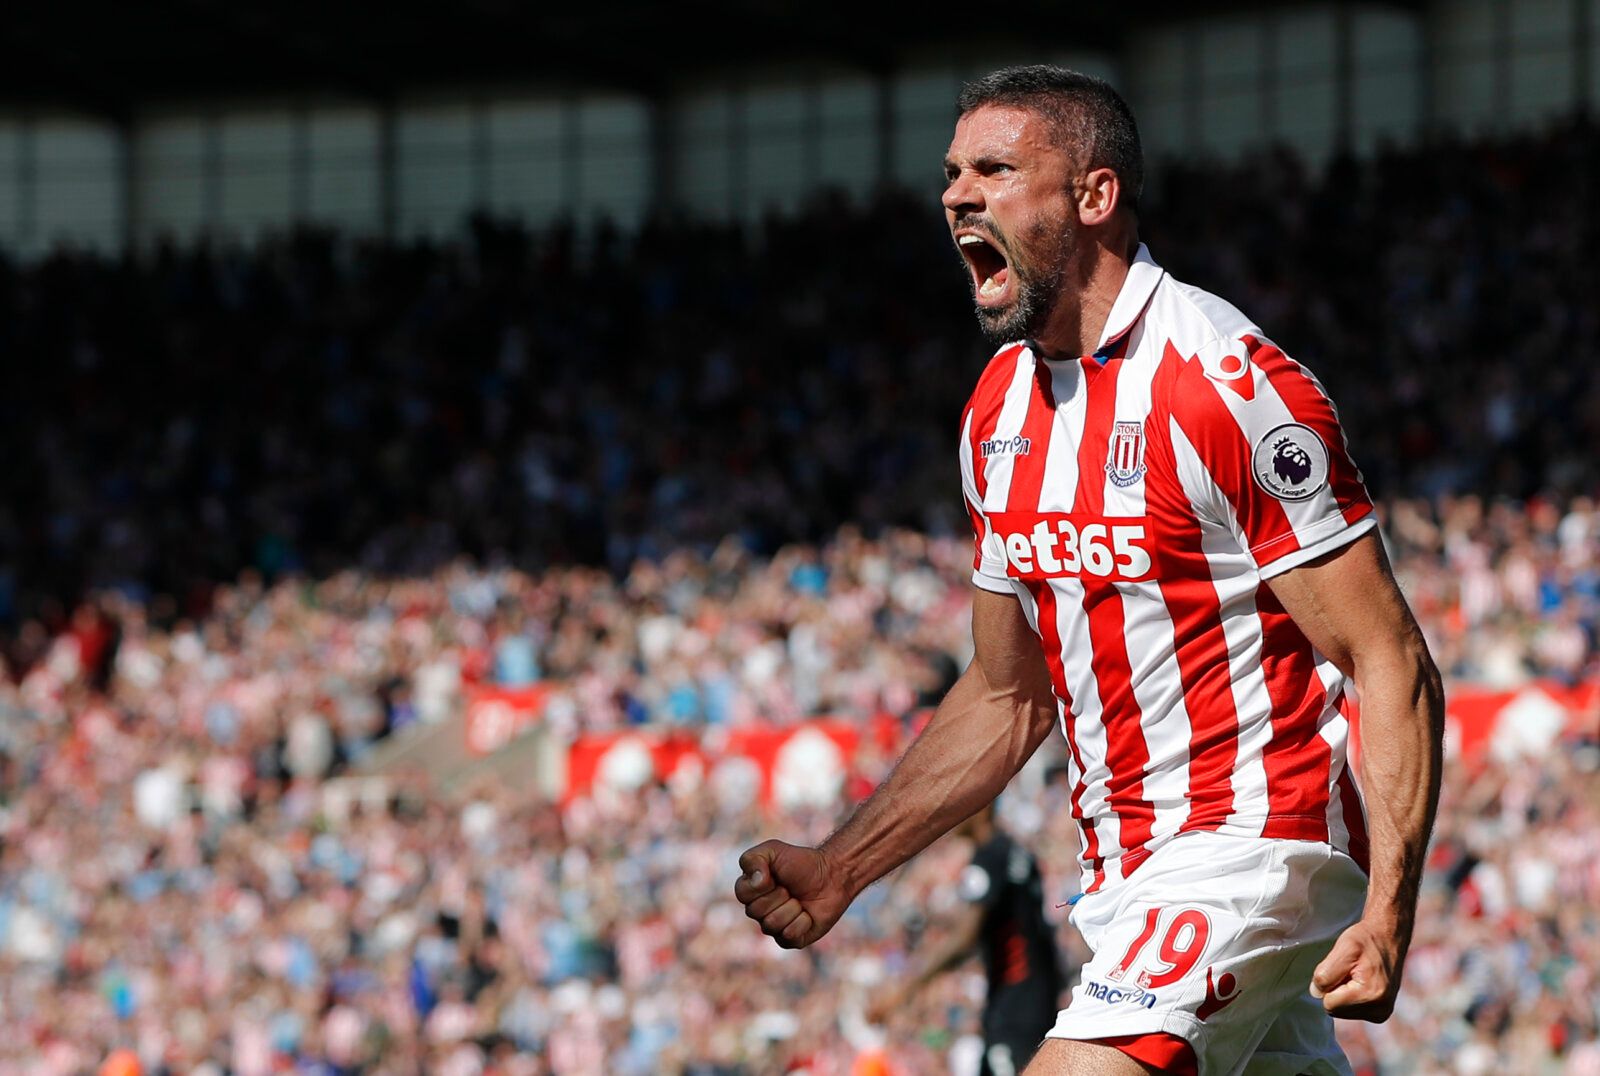 Britain Football Soccer - Stoke City v Liverpool - Premier League - bet365 Stadium - 8/4/17 Stoke City's Jonathan Walters celebrates scoring their first goal  Reuters / Darren Staples Livepic EDITORIAL USE ONLY. No use with unauthorized audio, video, data, fixture lists, club/league logos or 